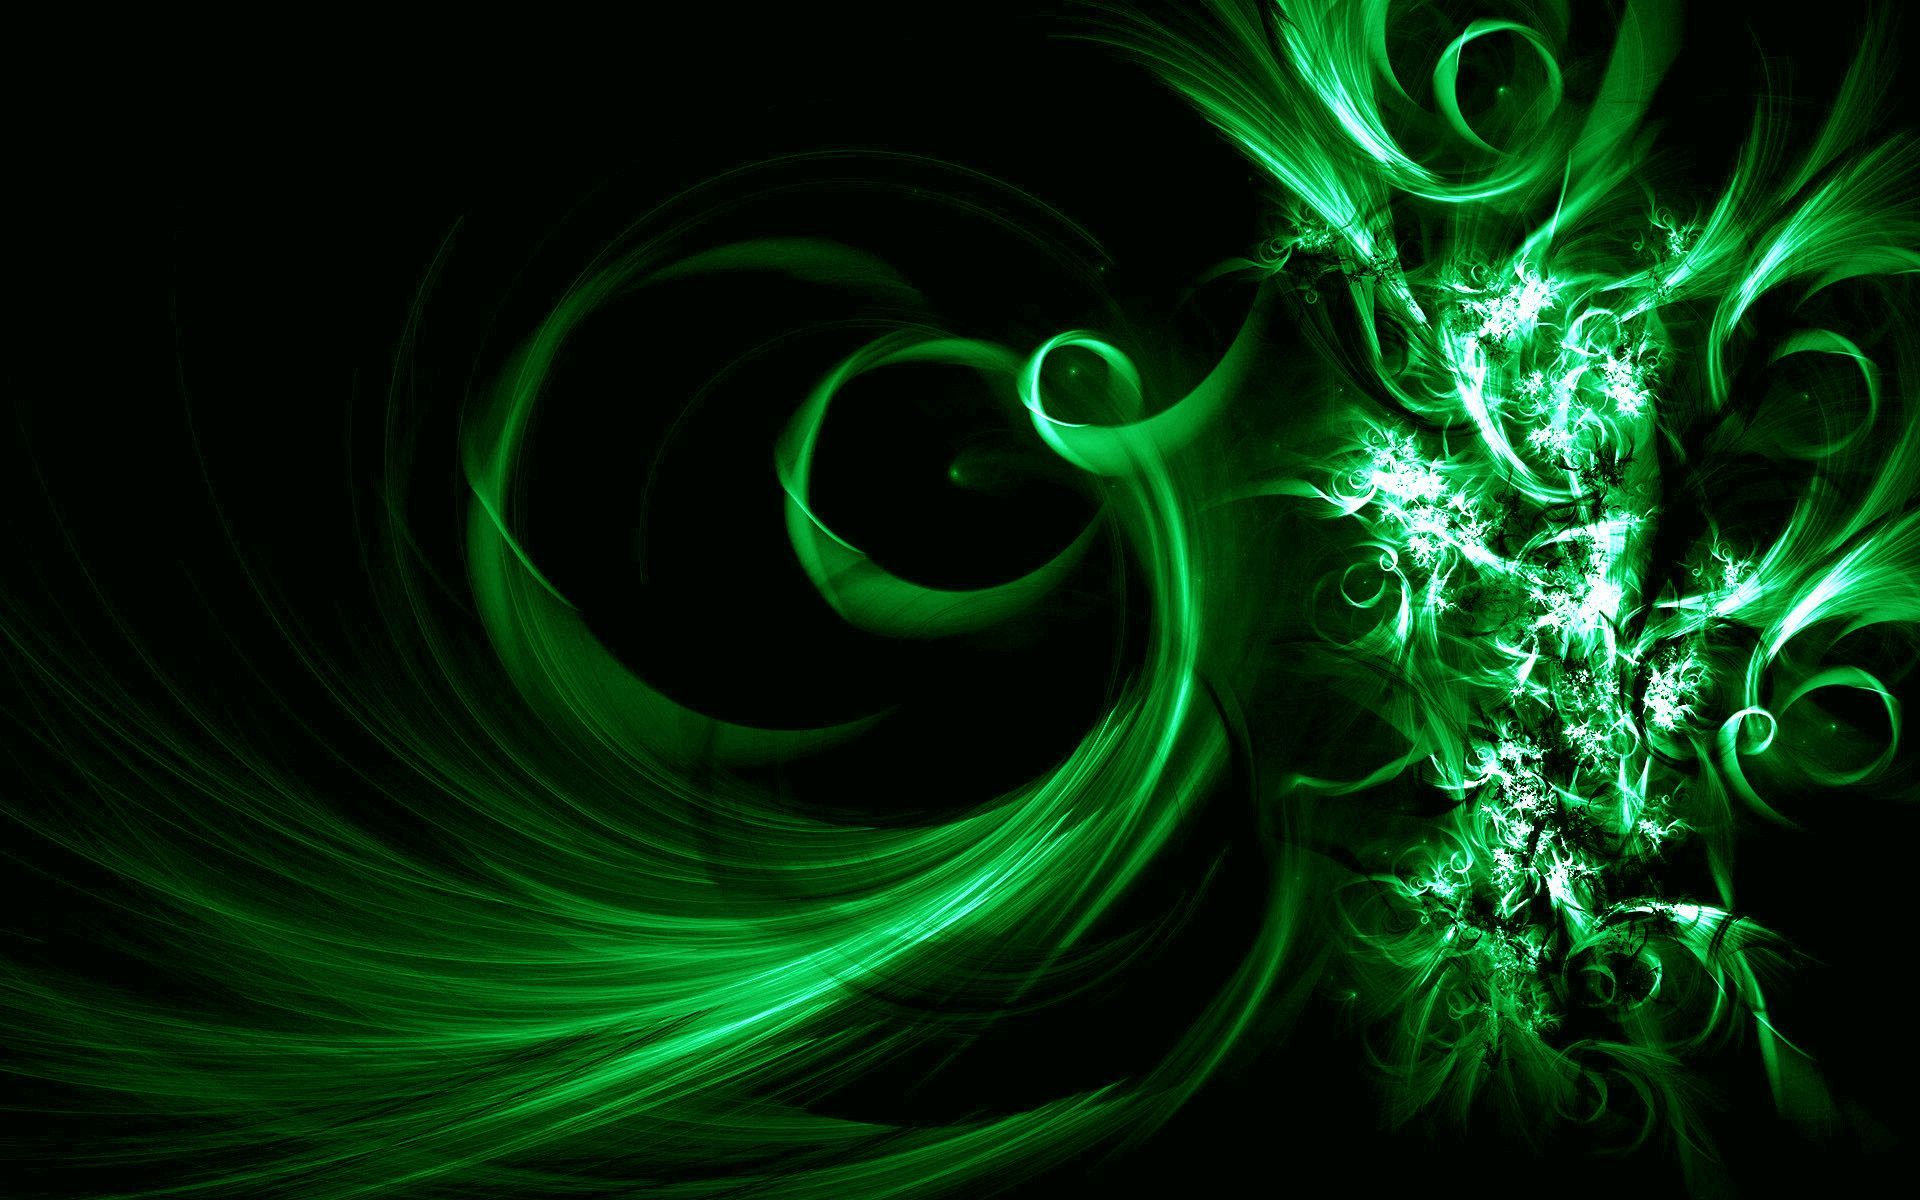 Black and Green Abstract Wallpaper Free Black and Green Abstract Background